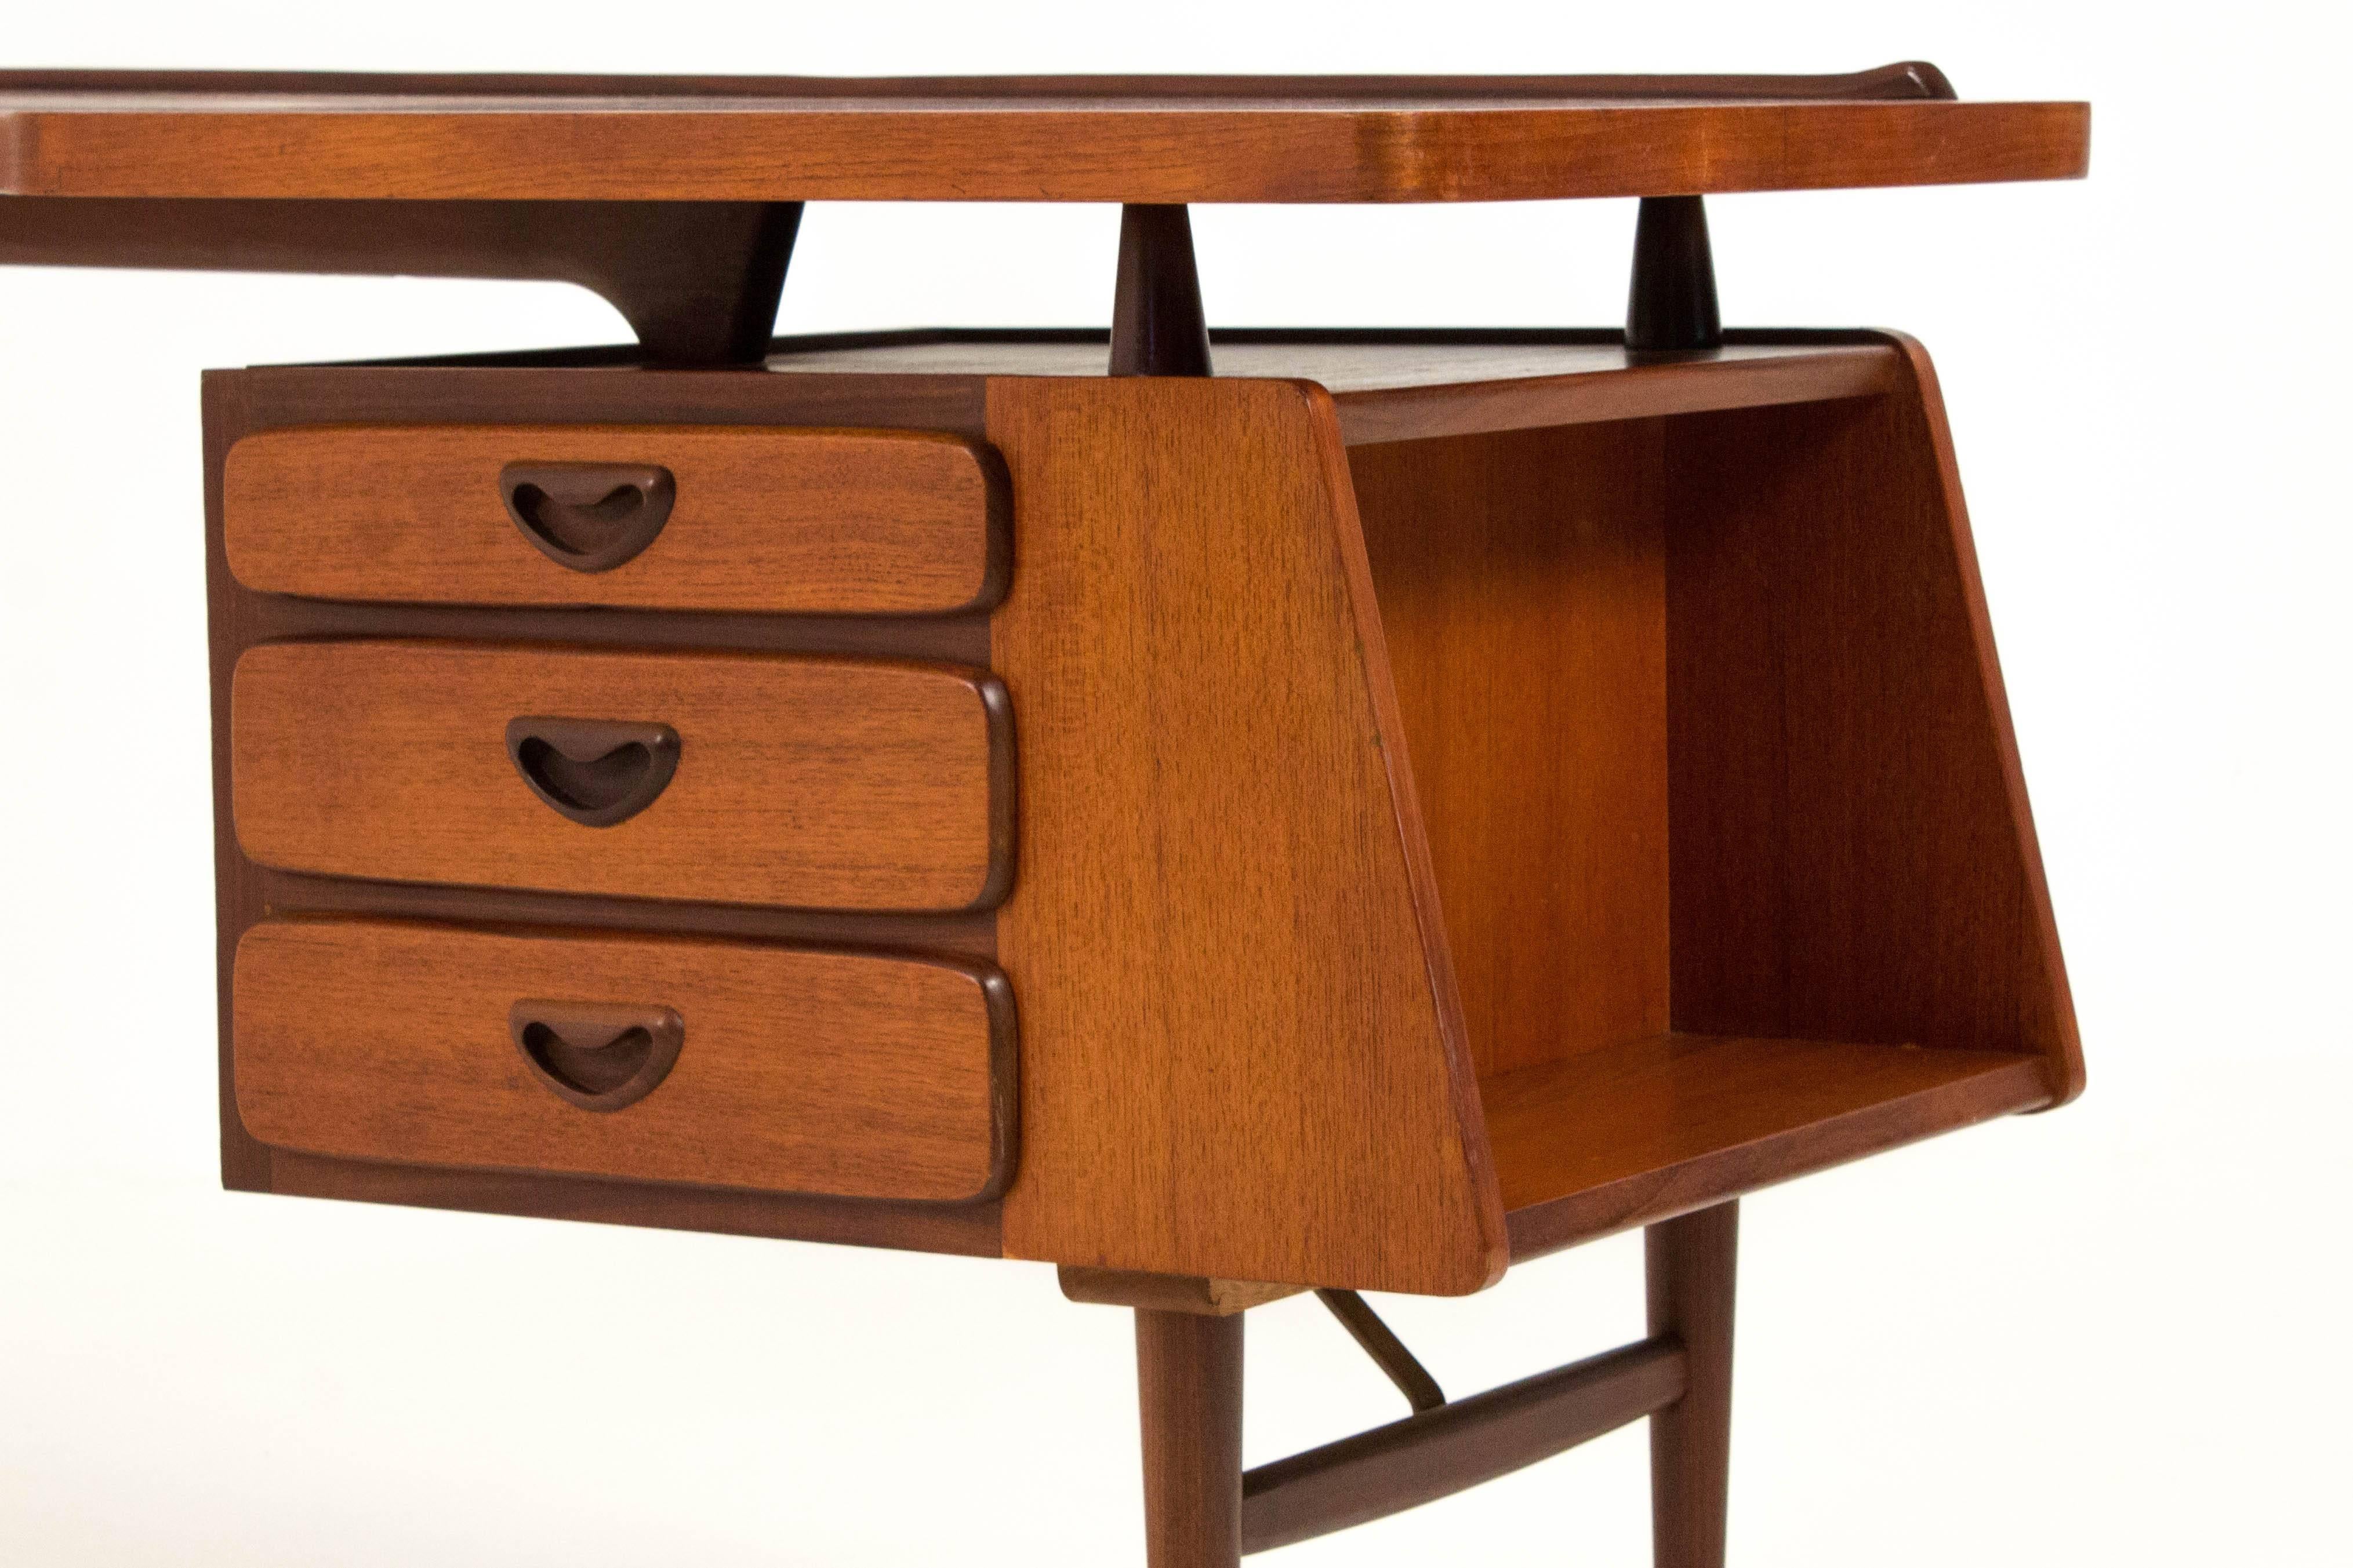 Iconic Mid-Century Modern desk by Louis Van Teeffelen for Webe, 1959.
Teak with brass supports.
Striking design with floating top.
Marked with manufacturers label.
In very good condition with minor wear consistent with age and use,
preserving a